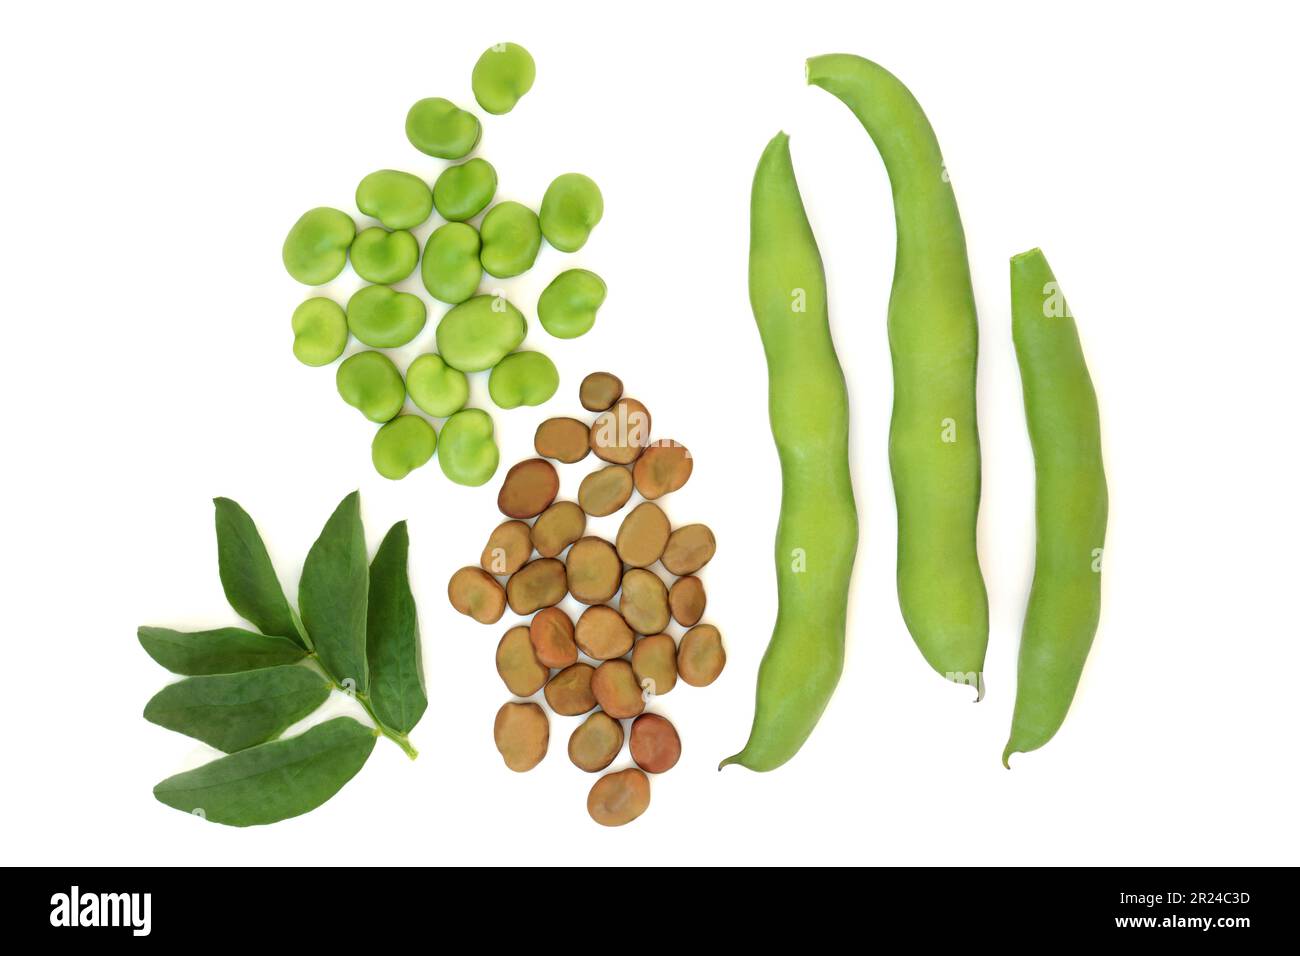 Broad bean legumes dried and fresh local produce with leaves. Vegetables high in fibre, protein, folate and B vitamins, can lower high cholesterol. Stock Photo